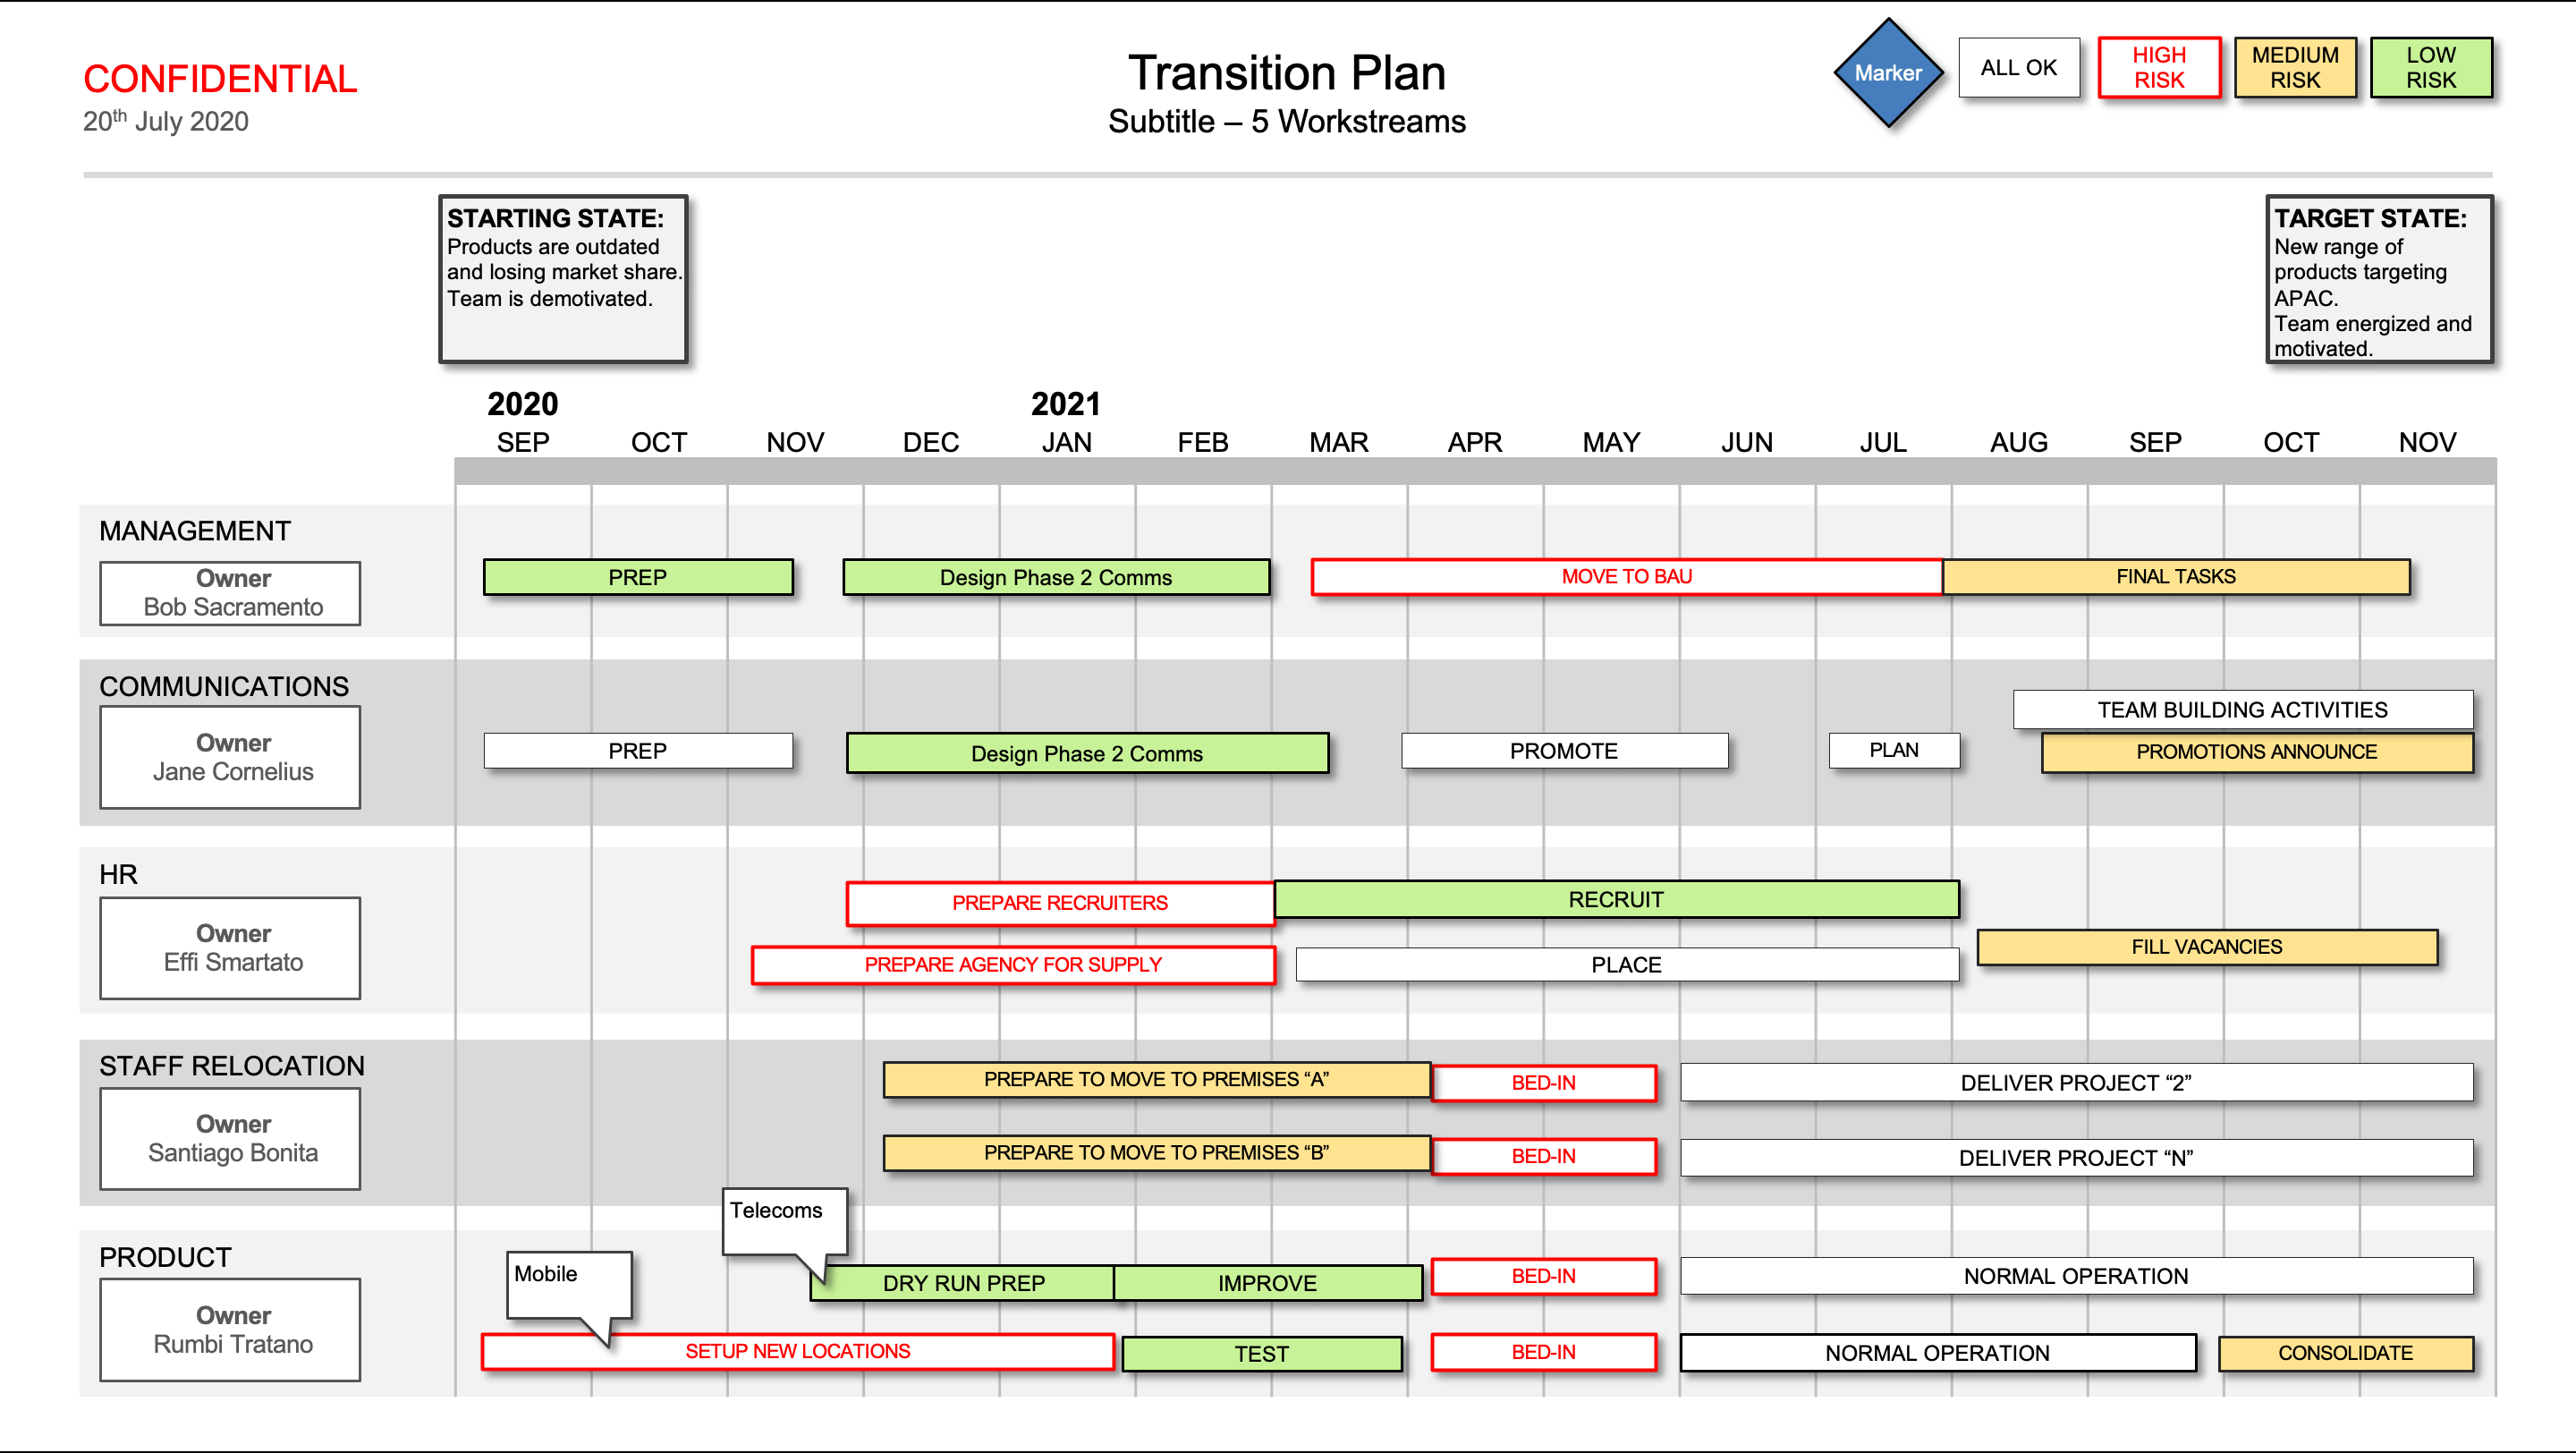 Transition Plan showing risk levels with a legend